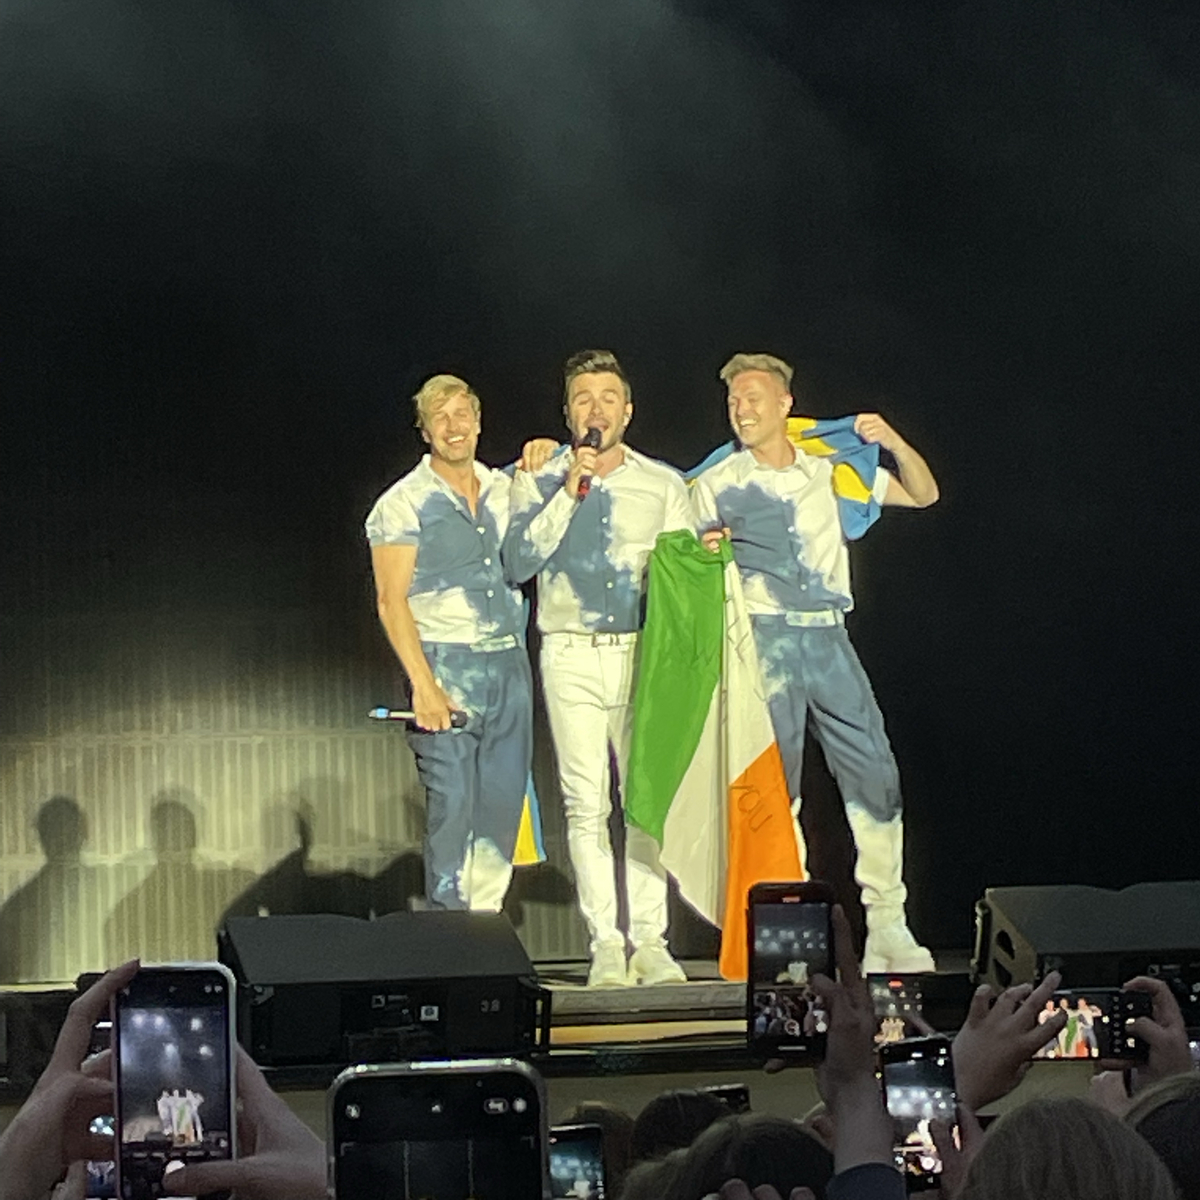 Irish pop band Westlife to tour India. Dates and other details